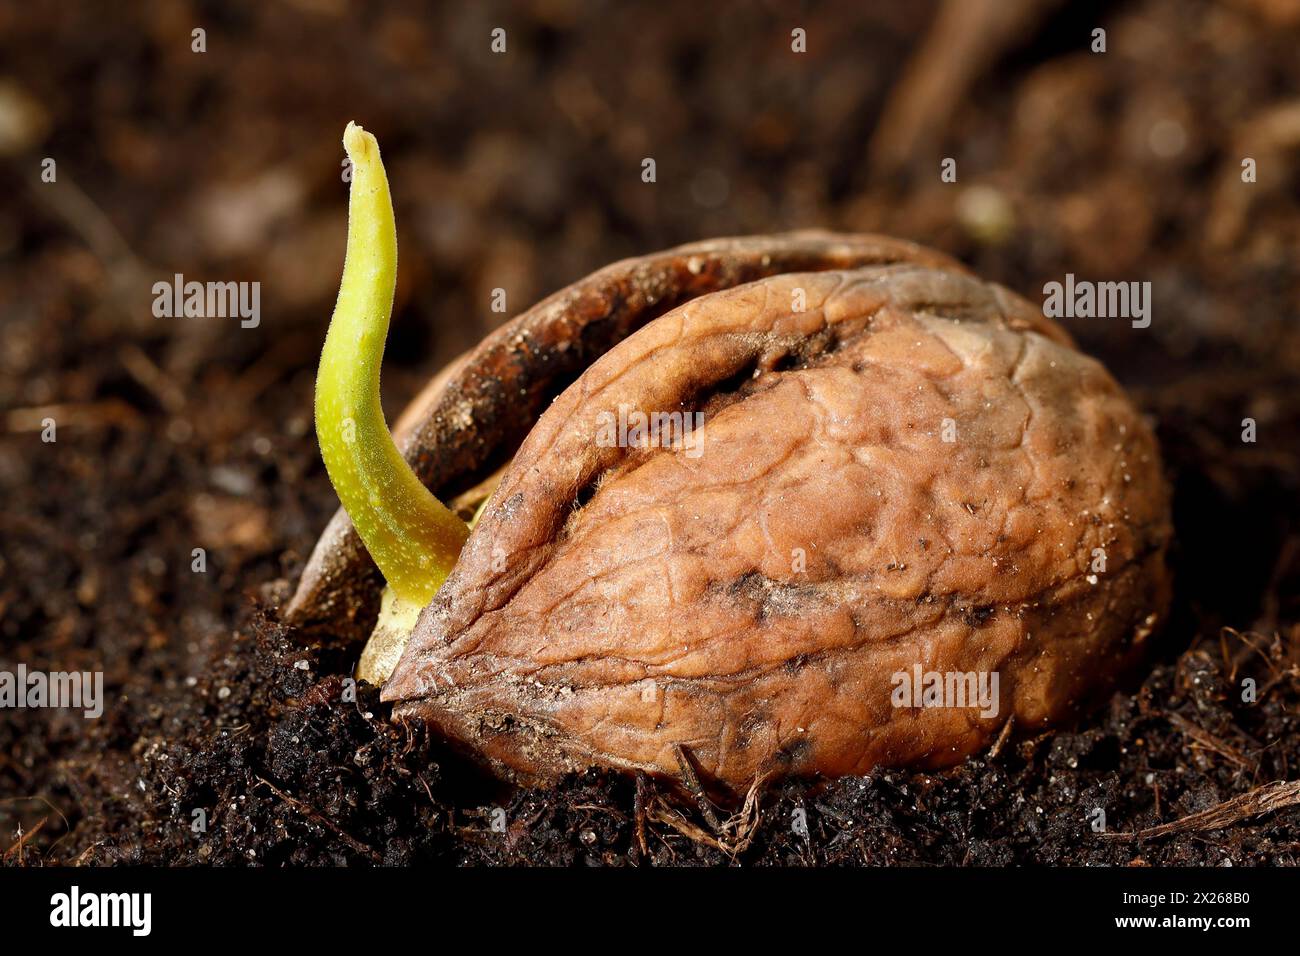 close up of germinating walnut in soil, young sprout of a walnut, Juglans regia Stock Photo